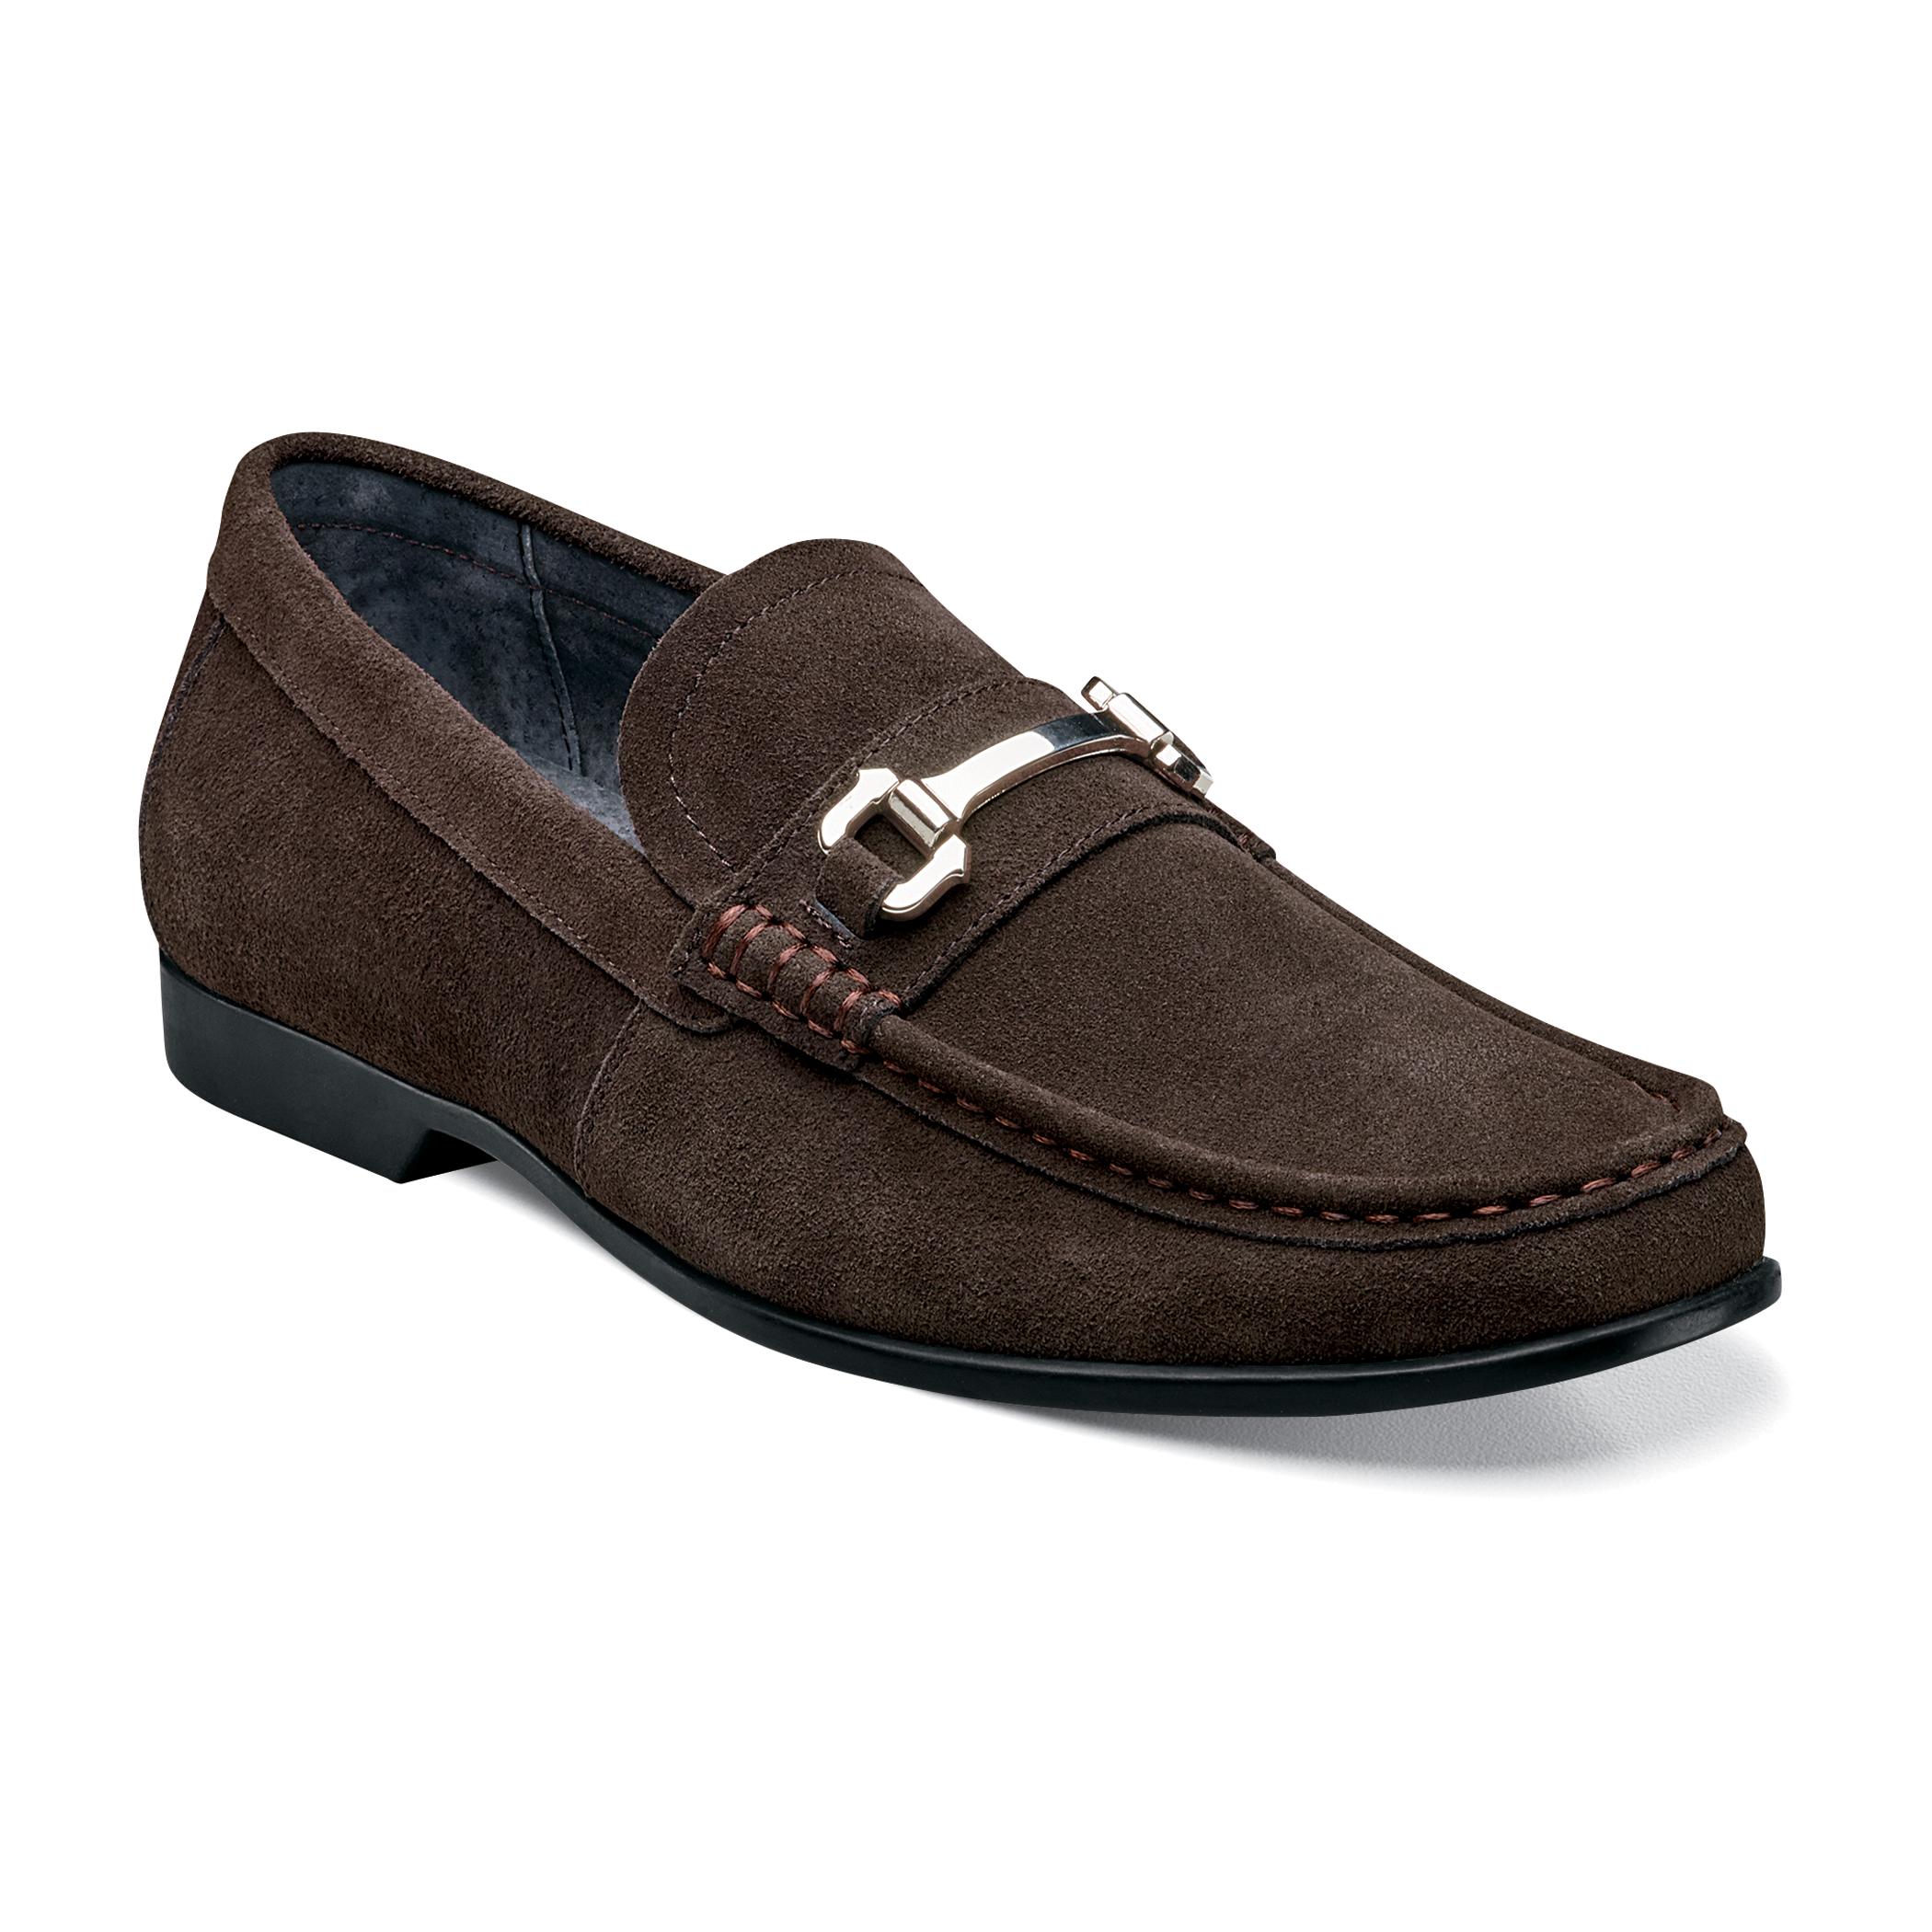 Stacy Adams Ellston Brown Suede Moc Toe Loafer Shoes 24951 - $84.90 ...